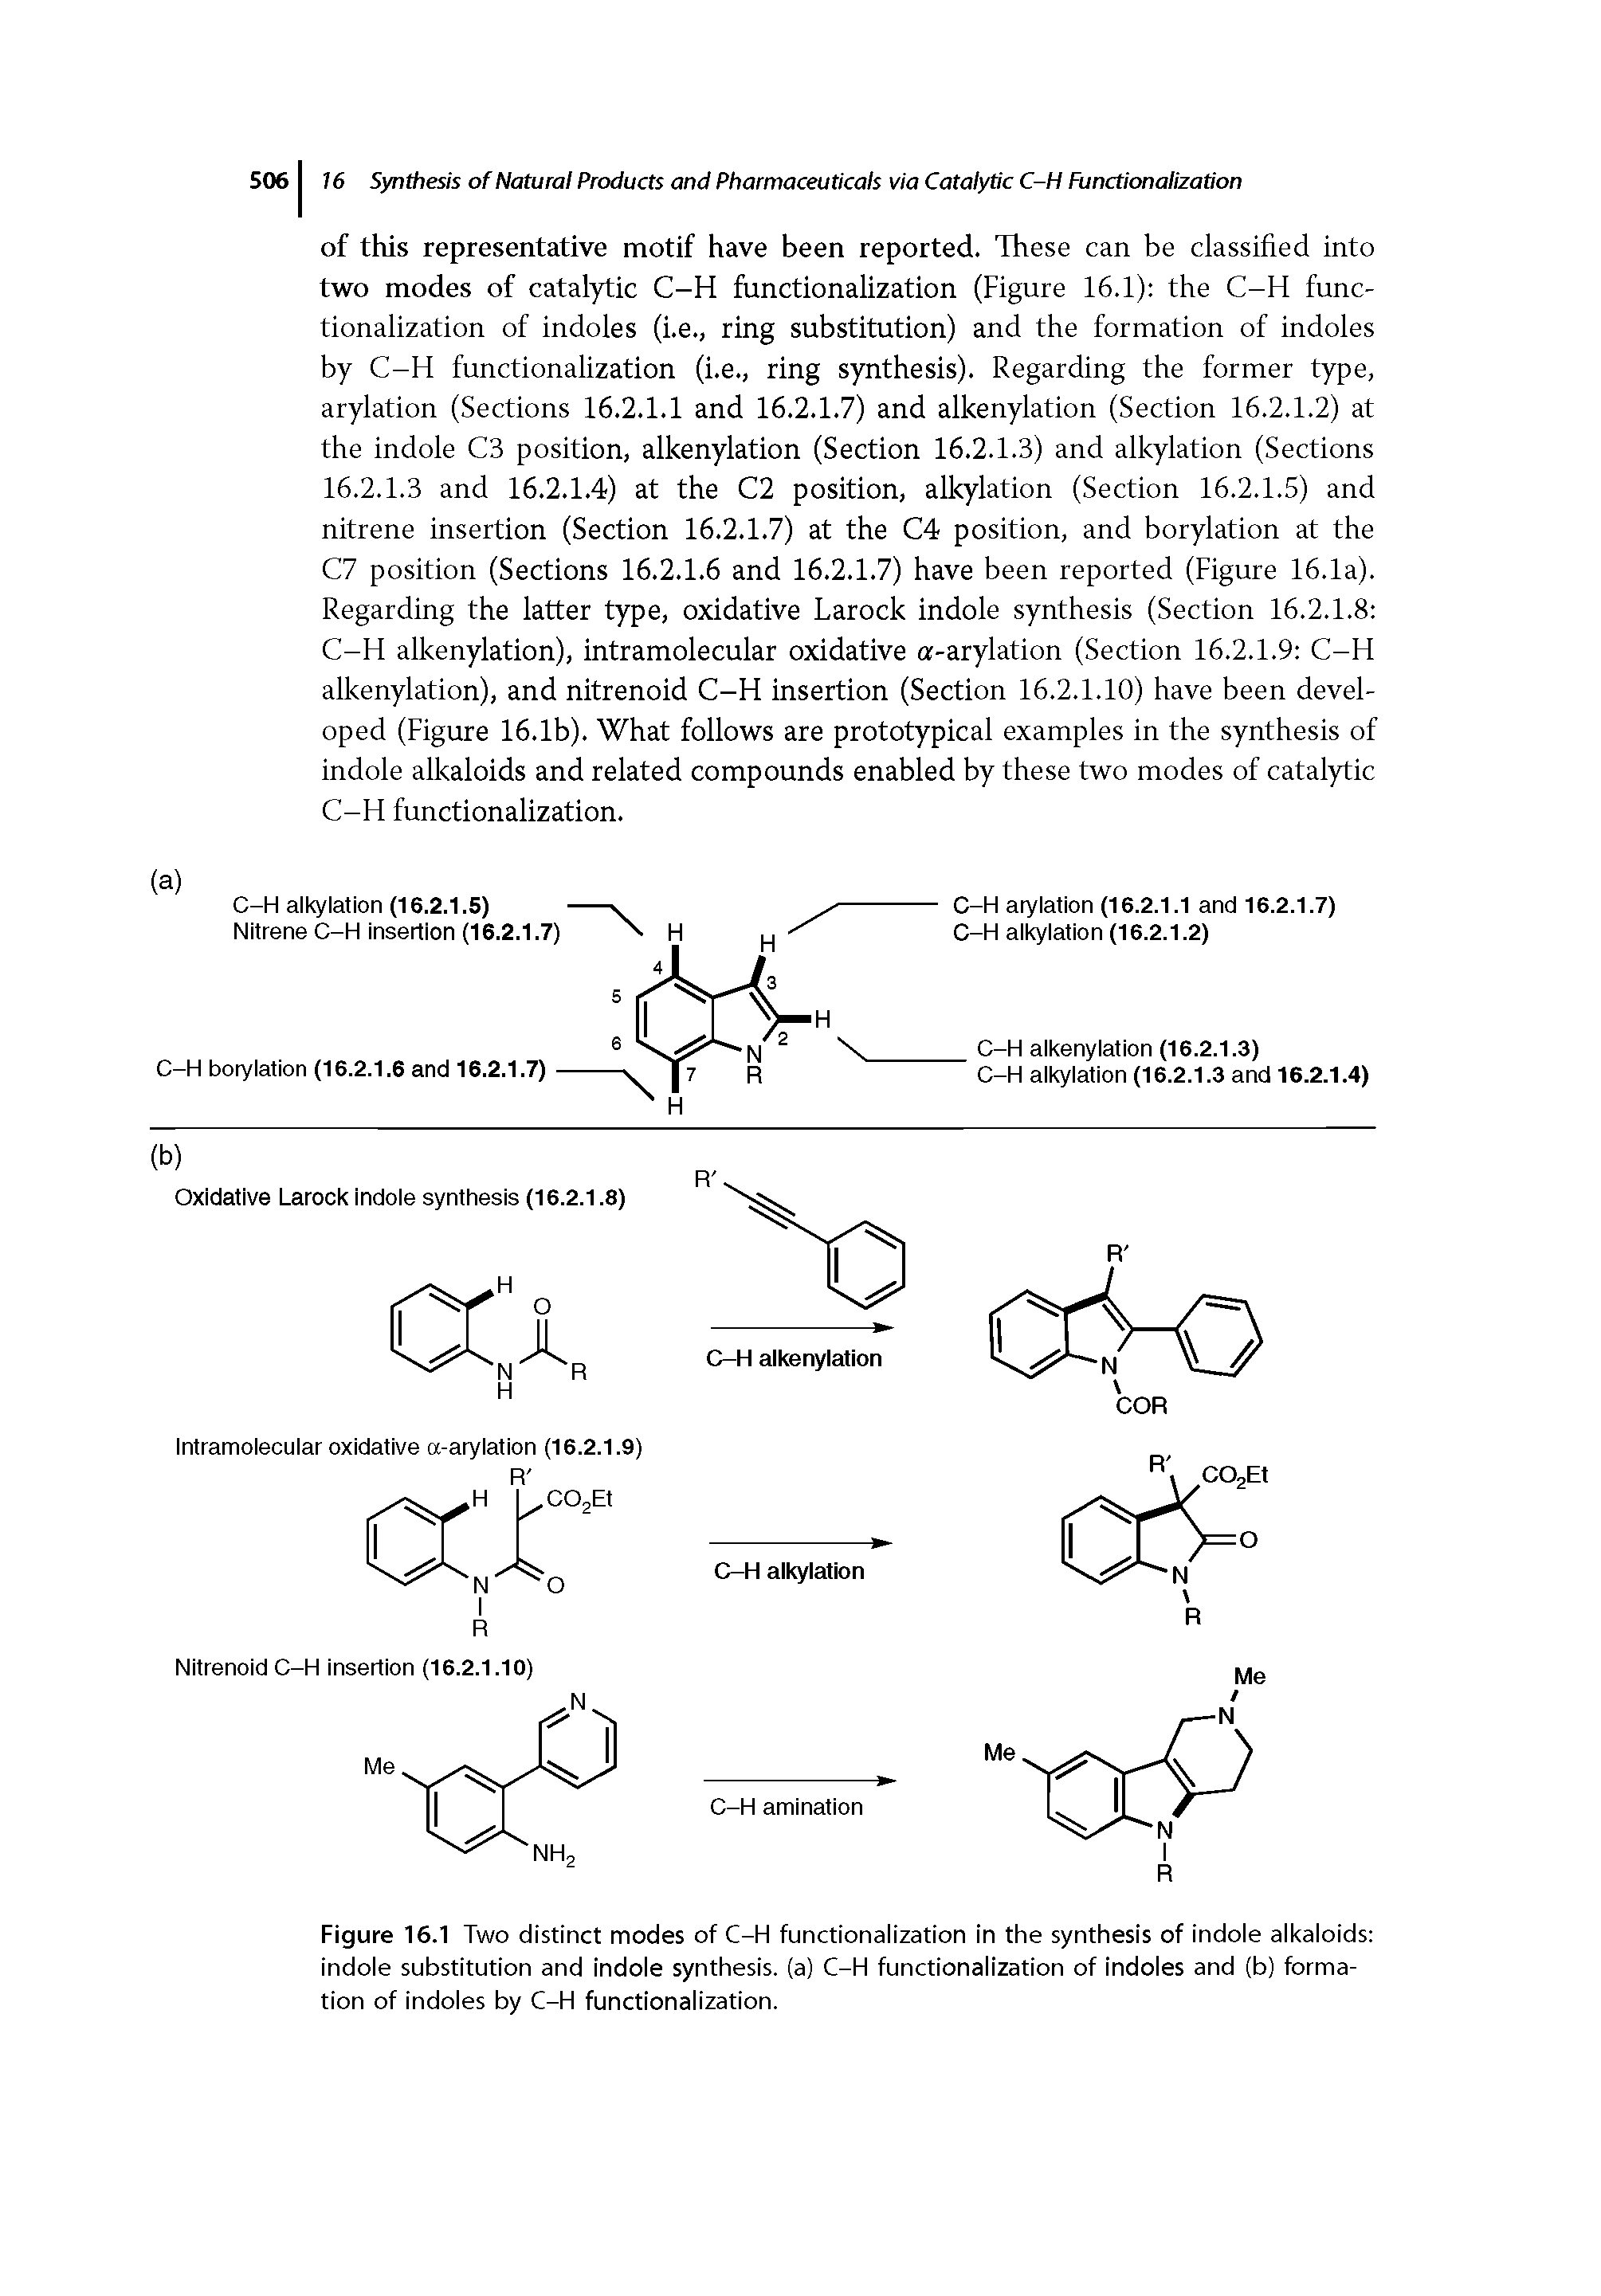 Figure 16.1 Two distinct modes of C-H functionalization in the synthesis of indoie aikaioids indoie substitution and indoie synthesis, (a) C-H functionalization of indoles and (b) formation of indoles by C-H functionalization.